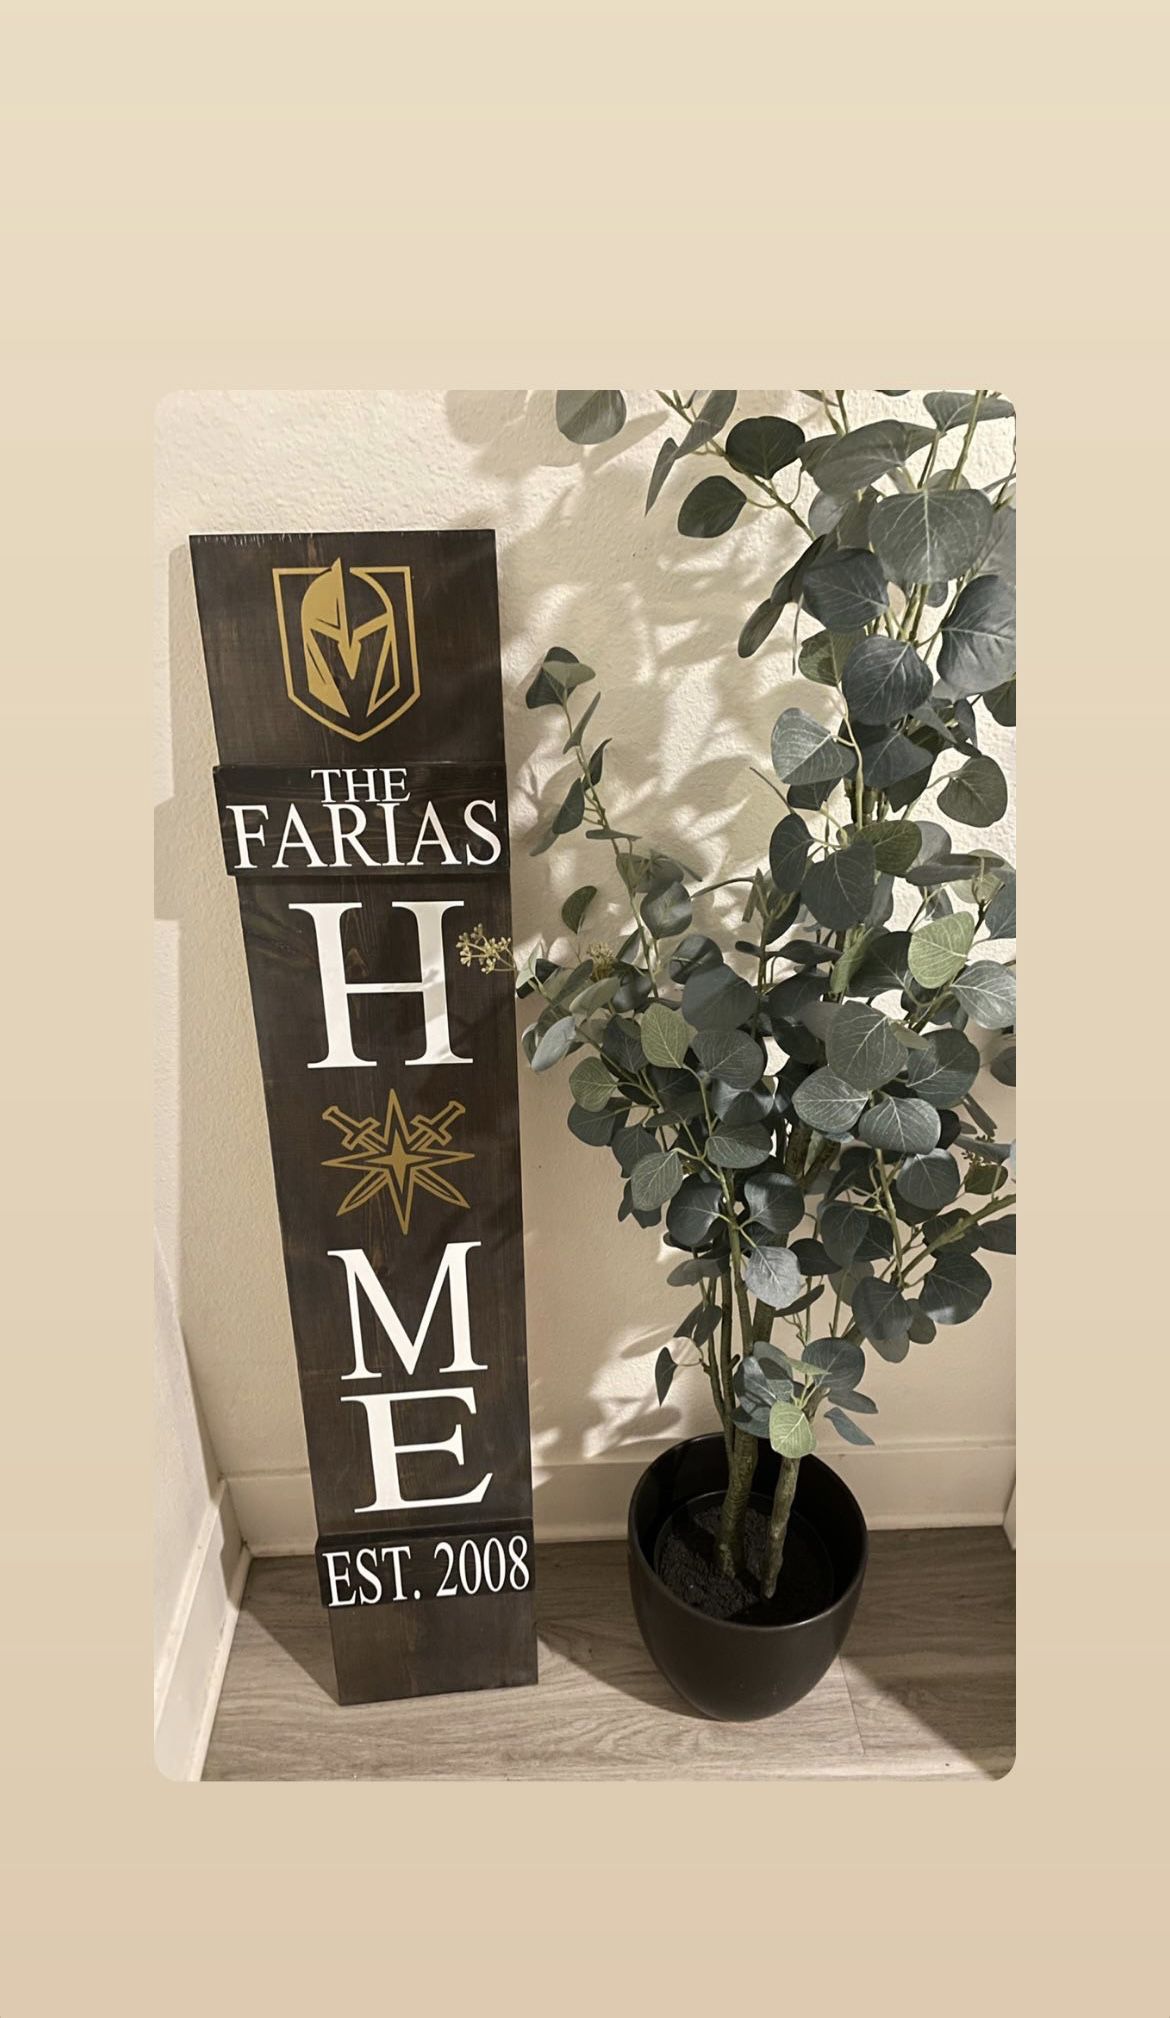 Golden Knights Home Signs 